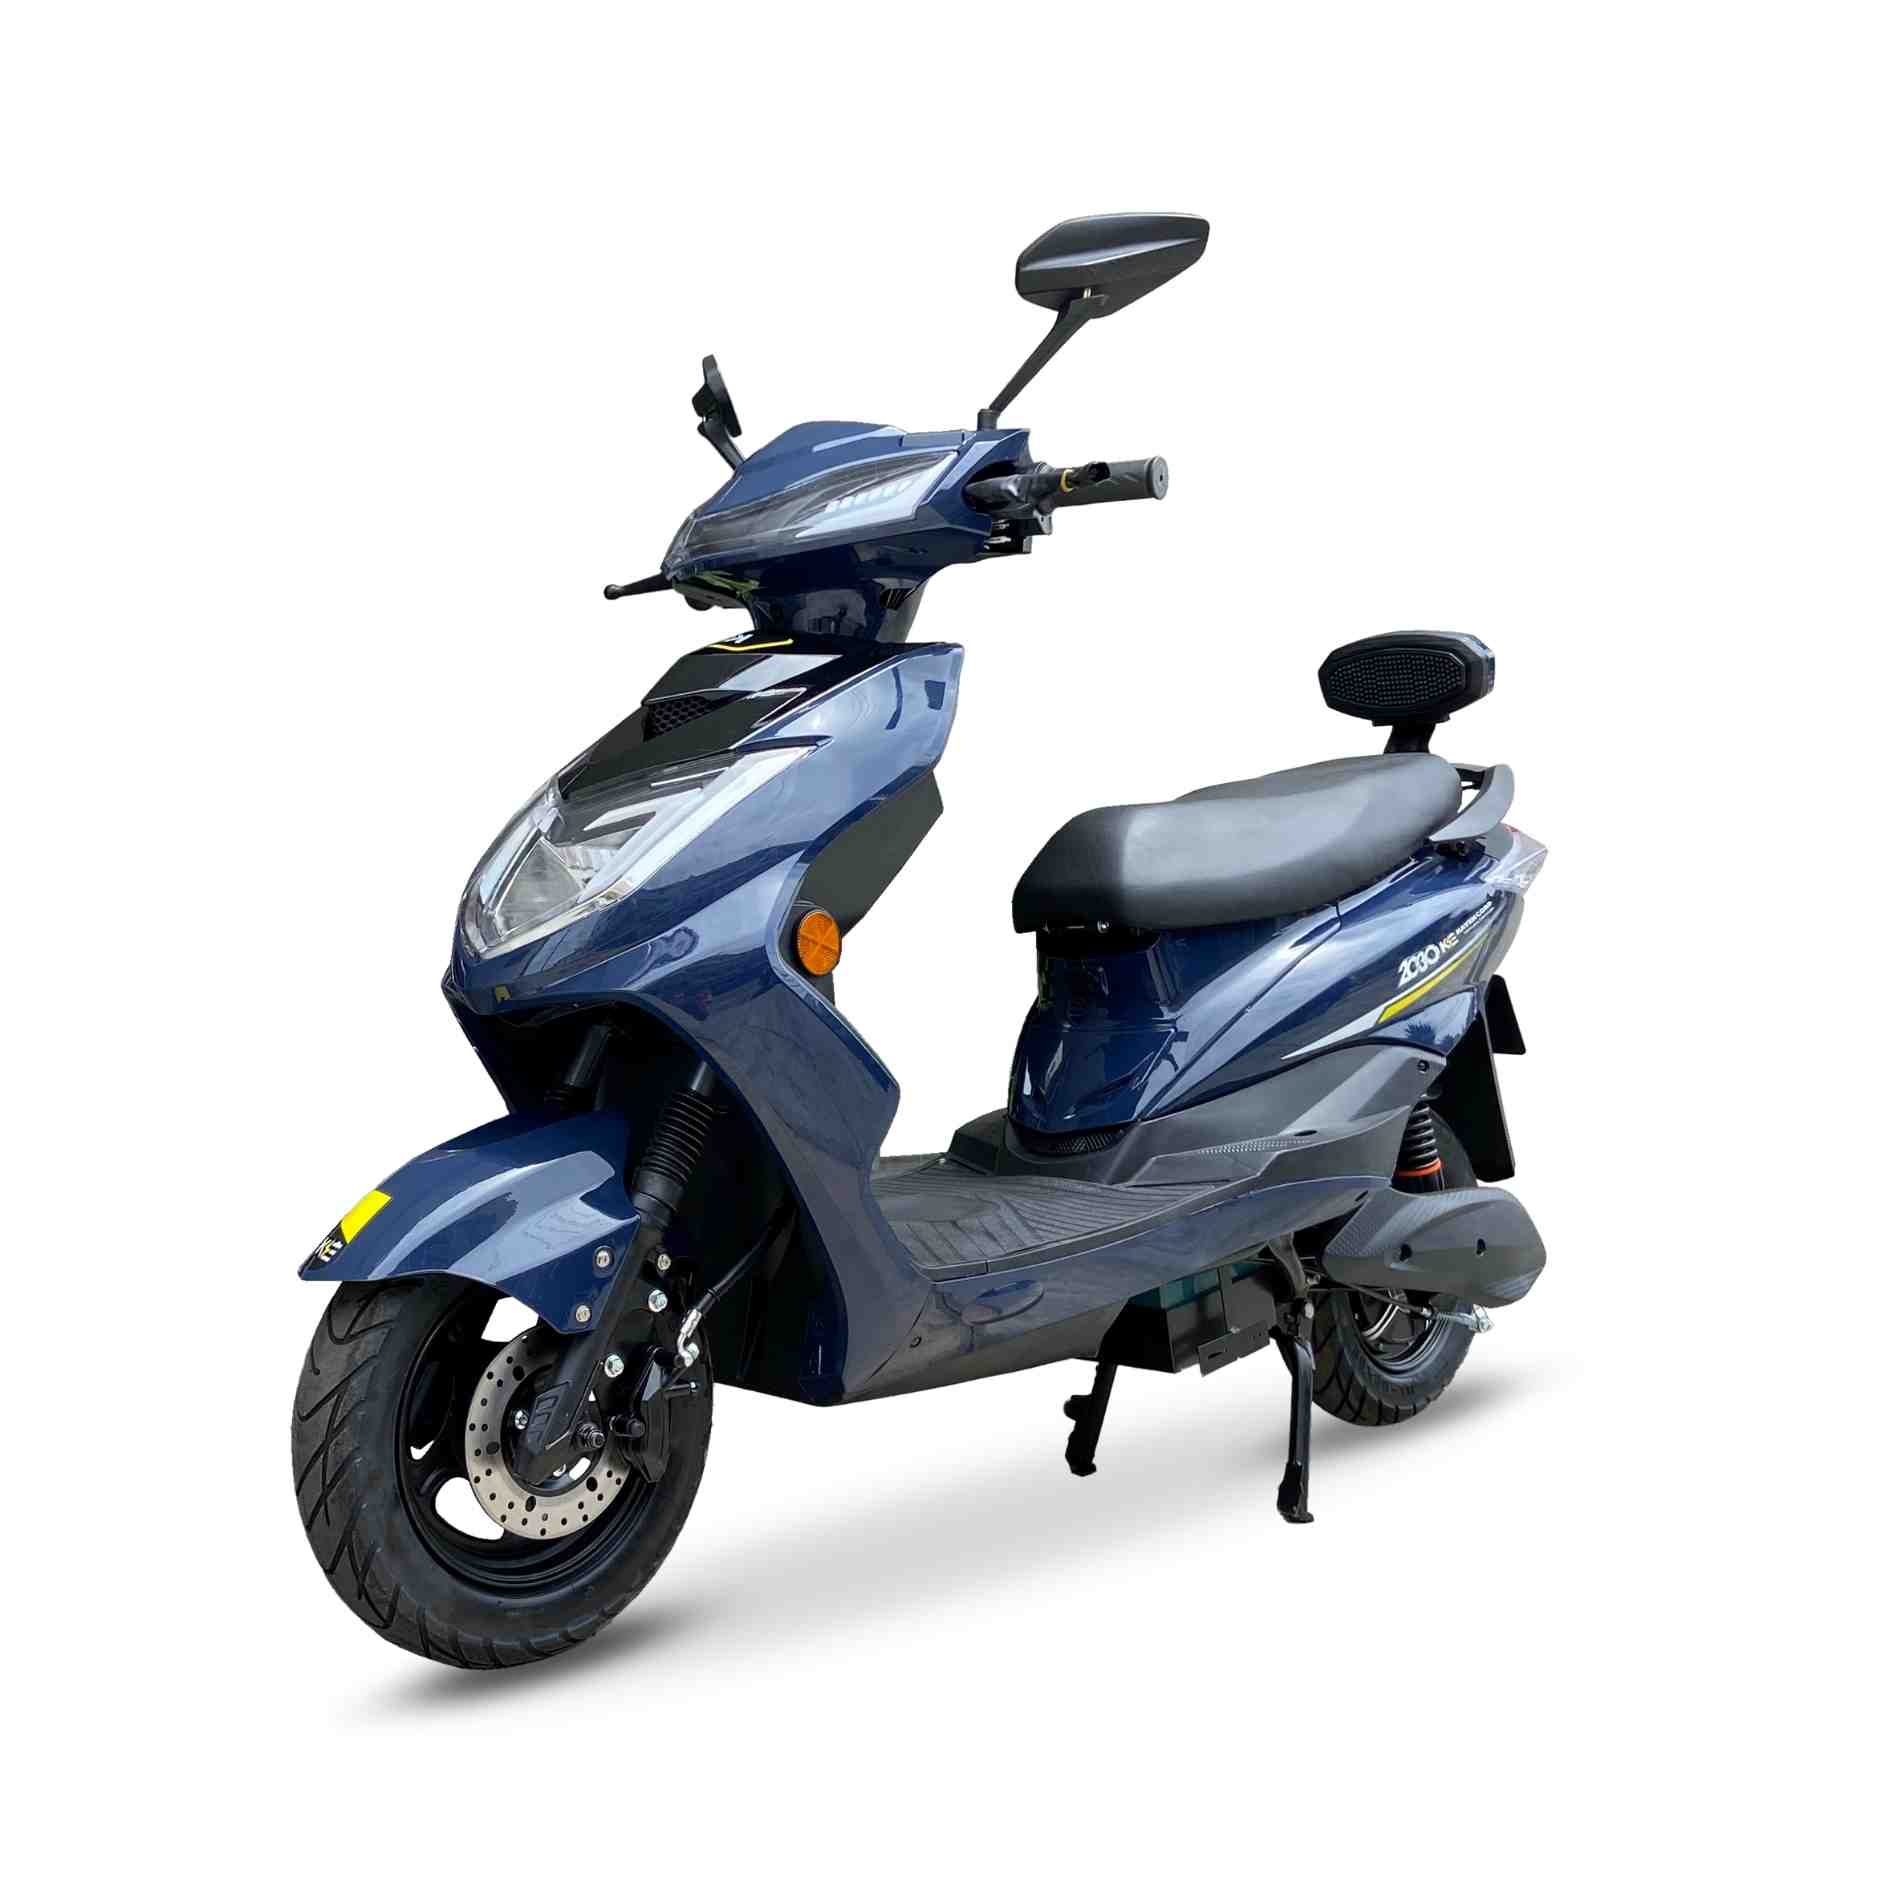 Moto scooter Ying5 - Frontal